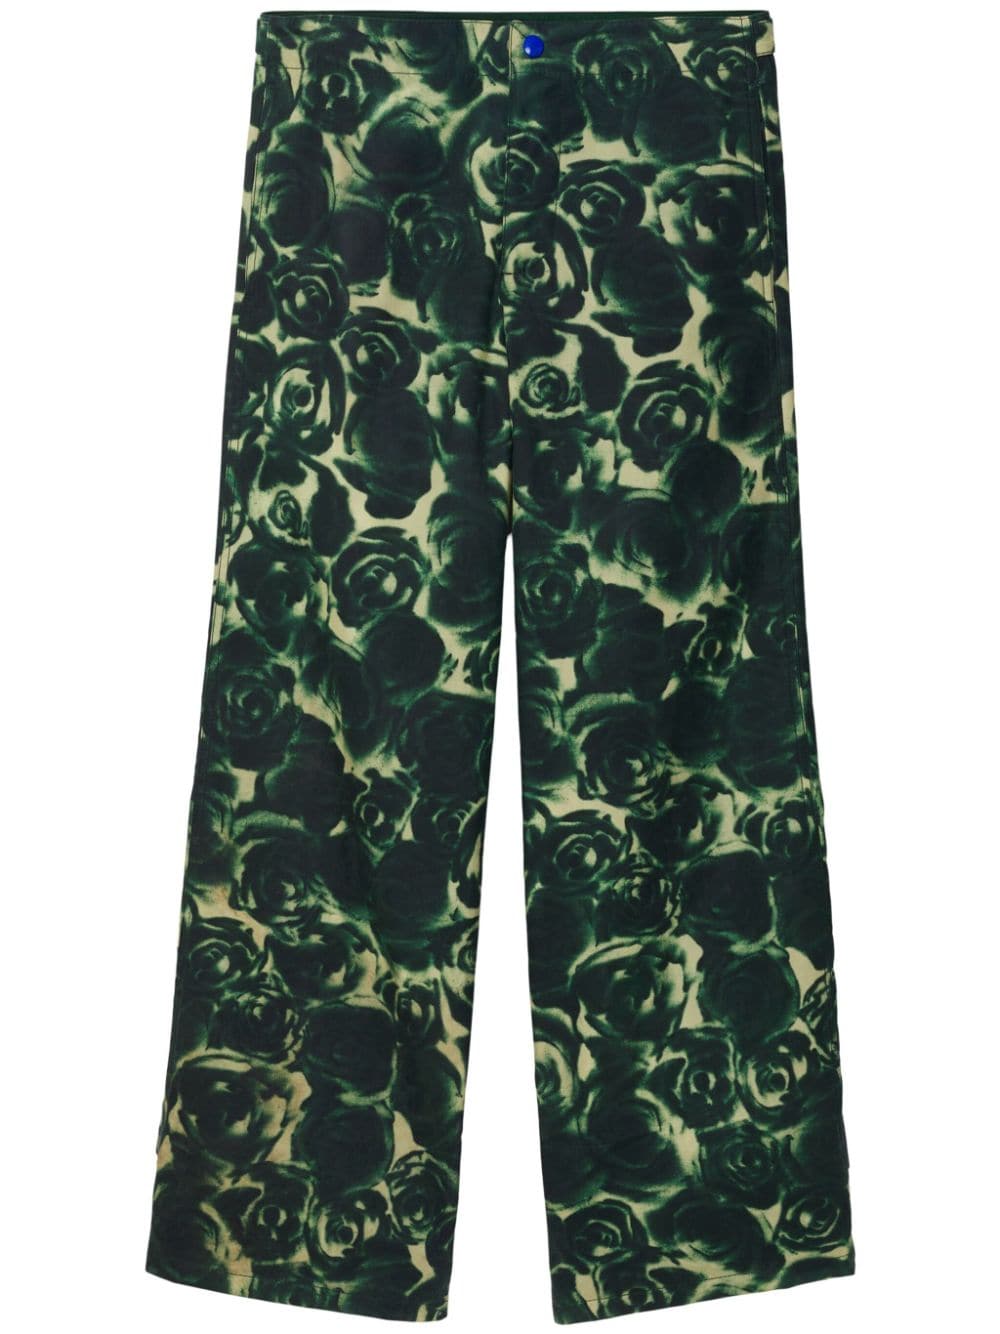 Burberry rose-print coated canvas trousers - Green von Burberry